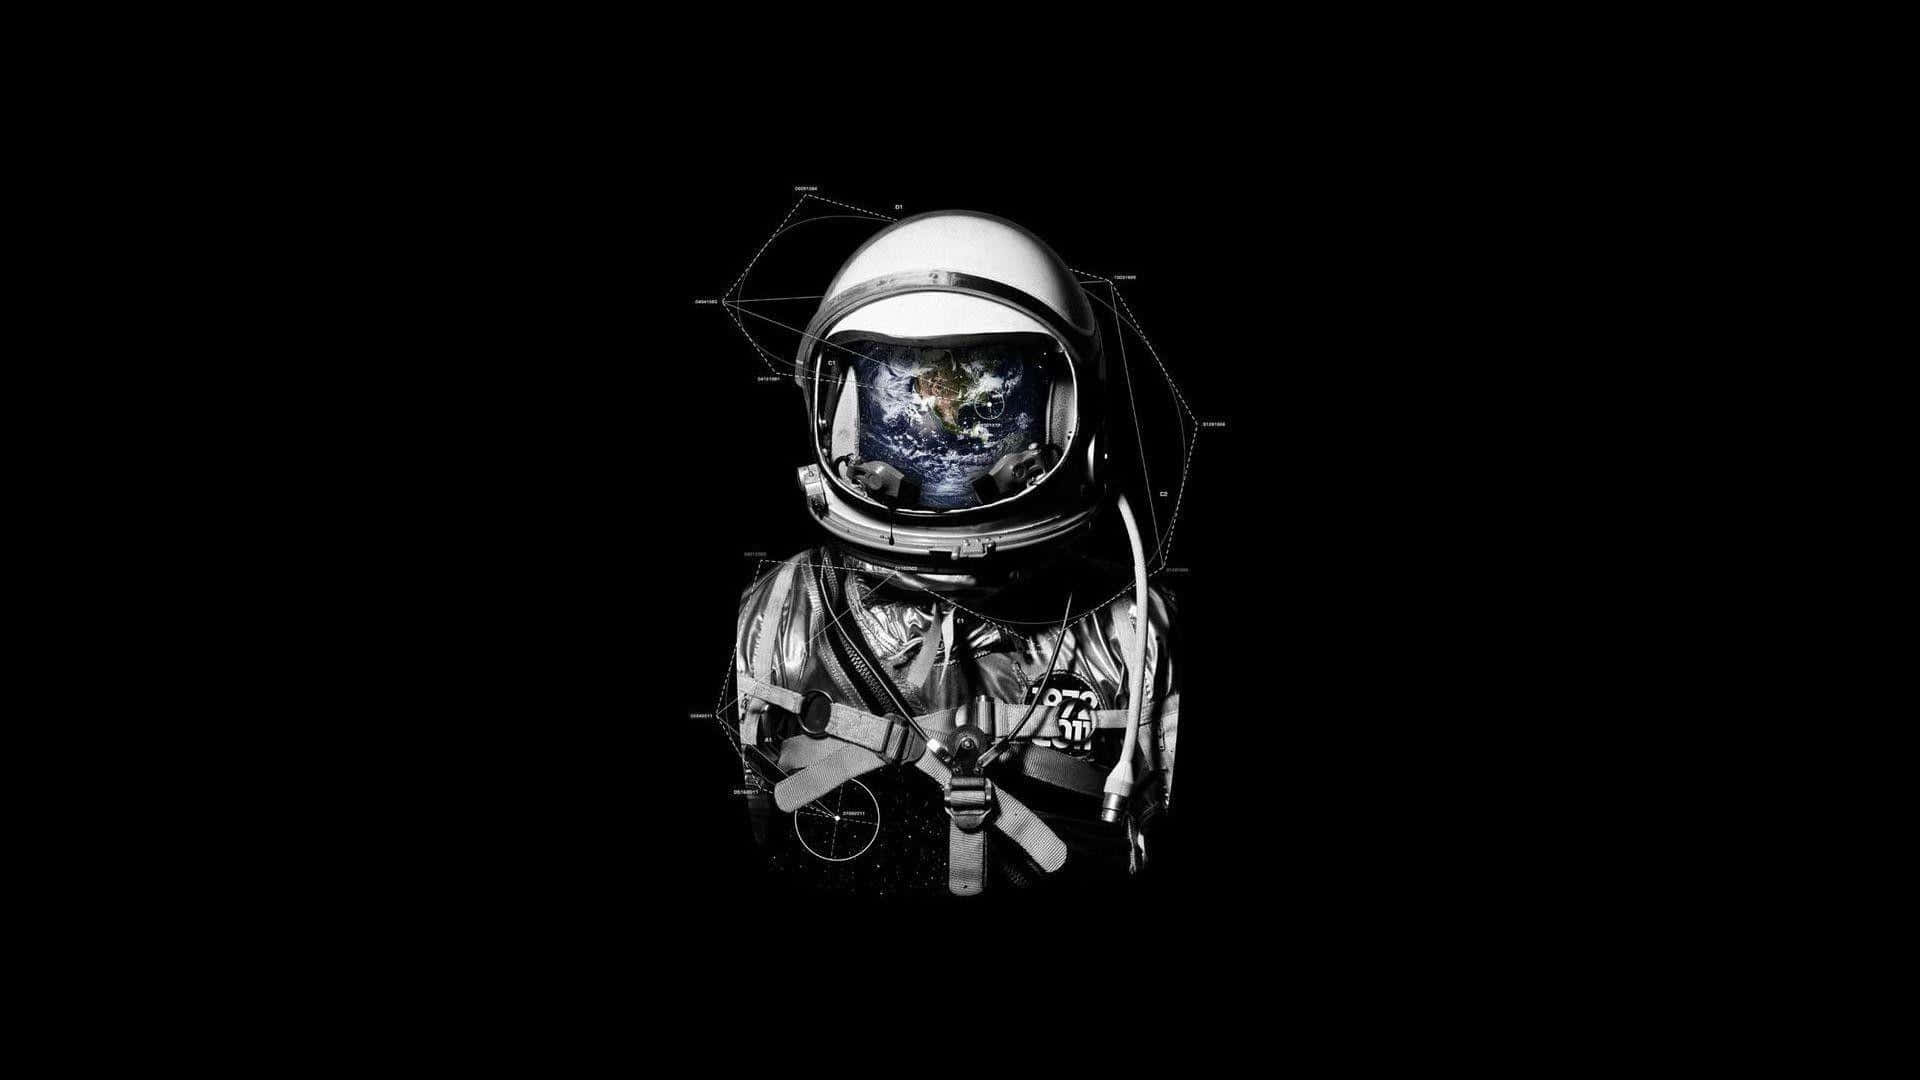 Enastronaut Utforskar Universum (this Would Be A Great Wallpaper For Anyone Interested In Space And Exploration.) Wallpaper